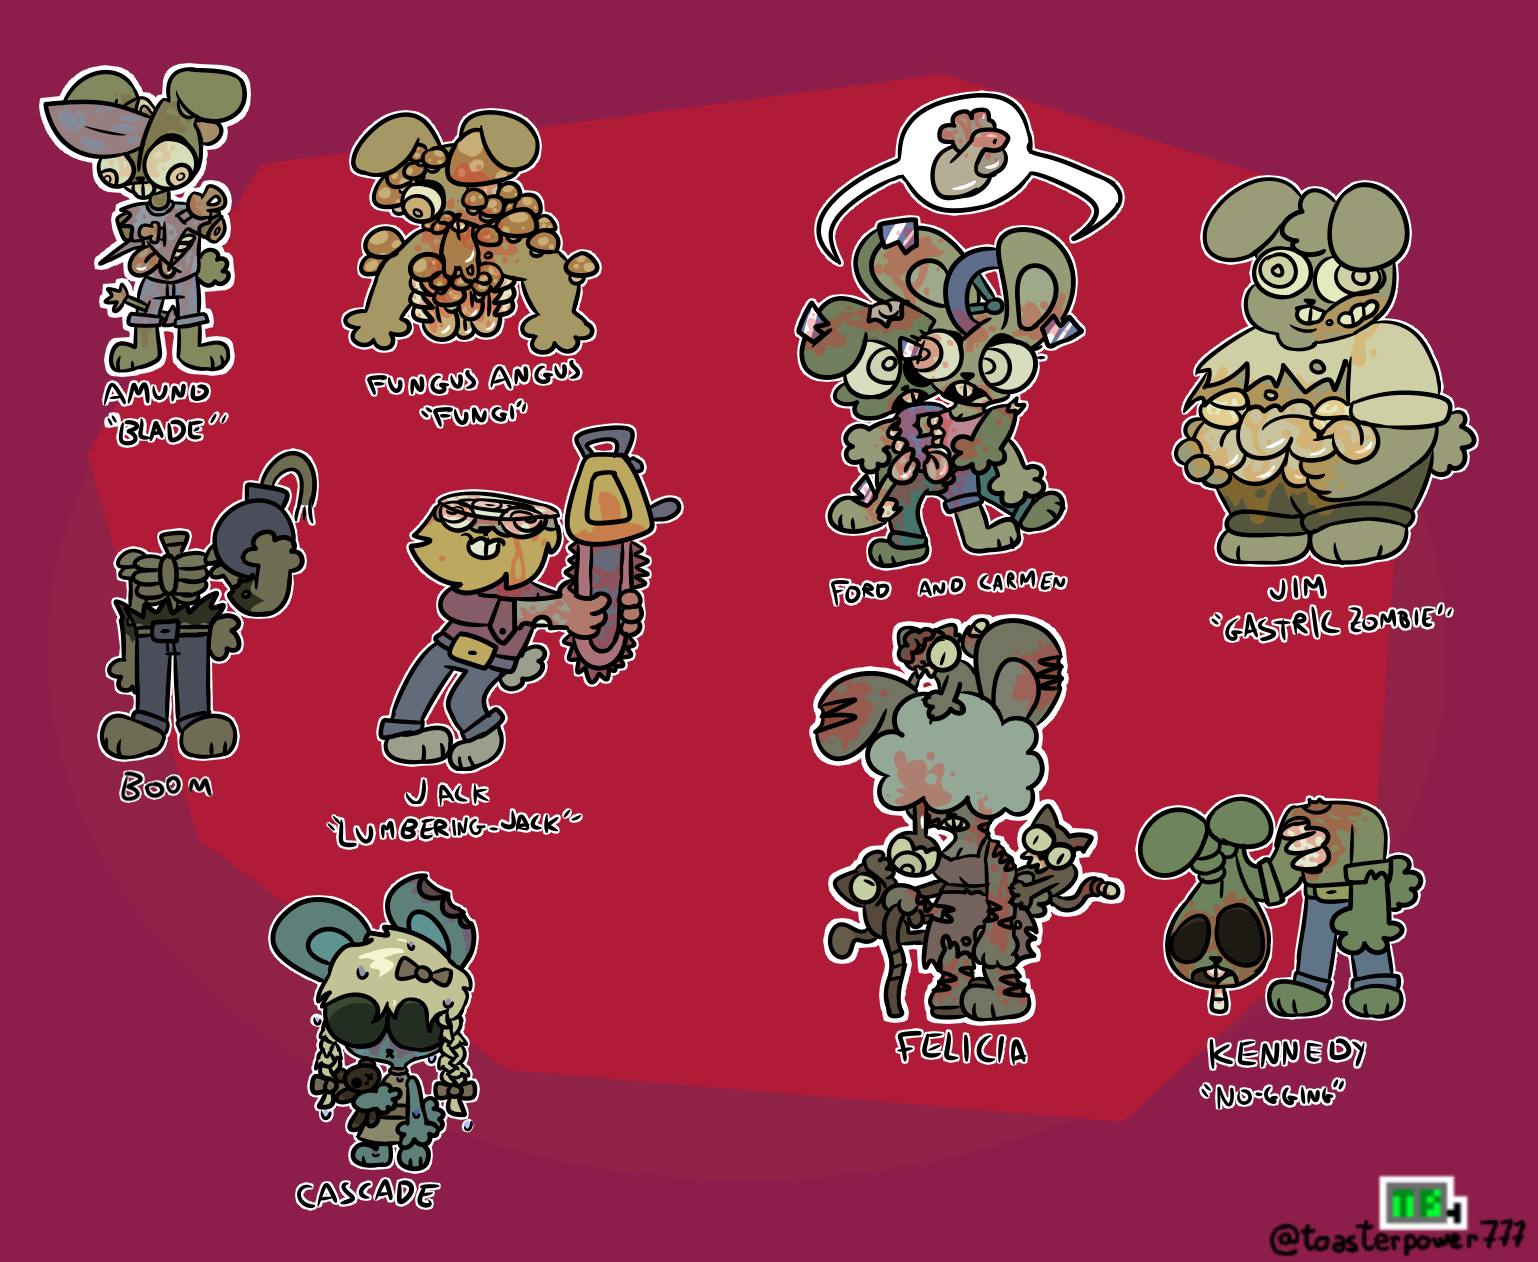 Some special zombie concepts